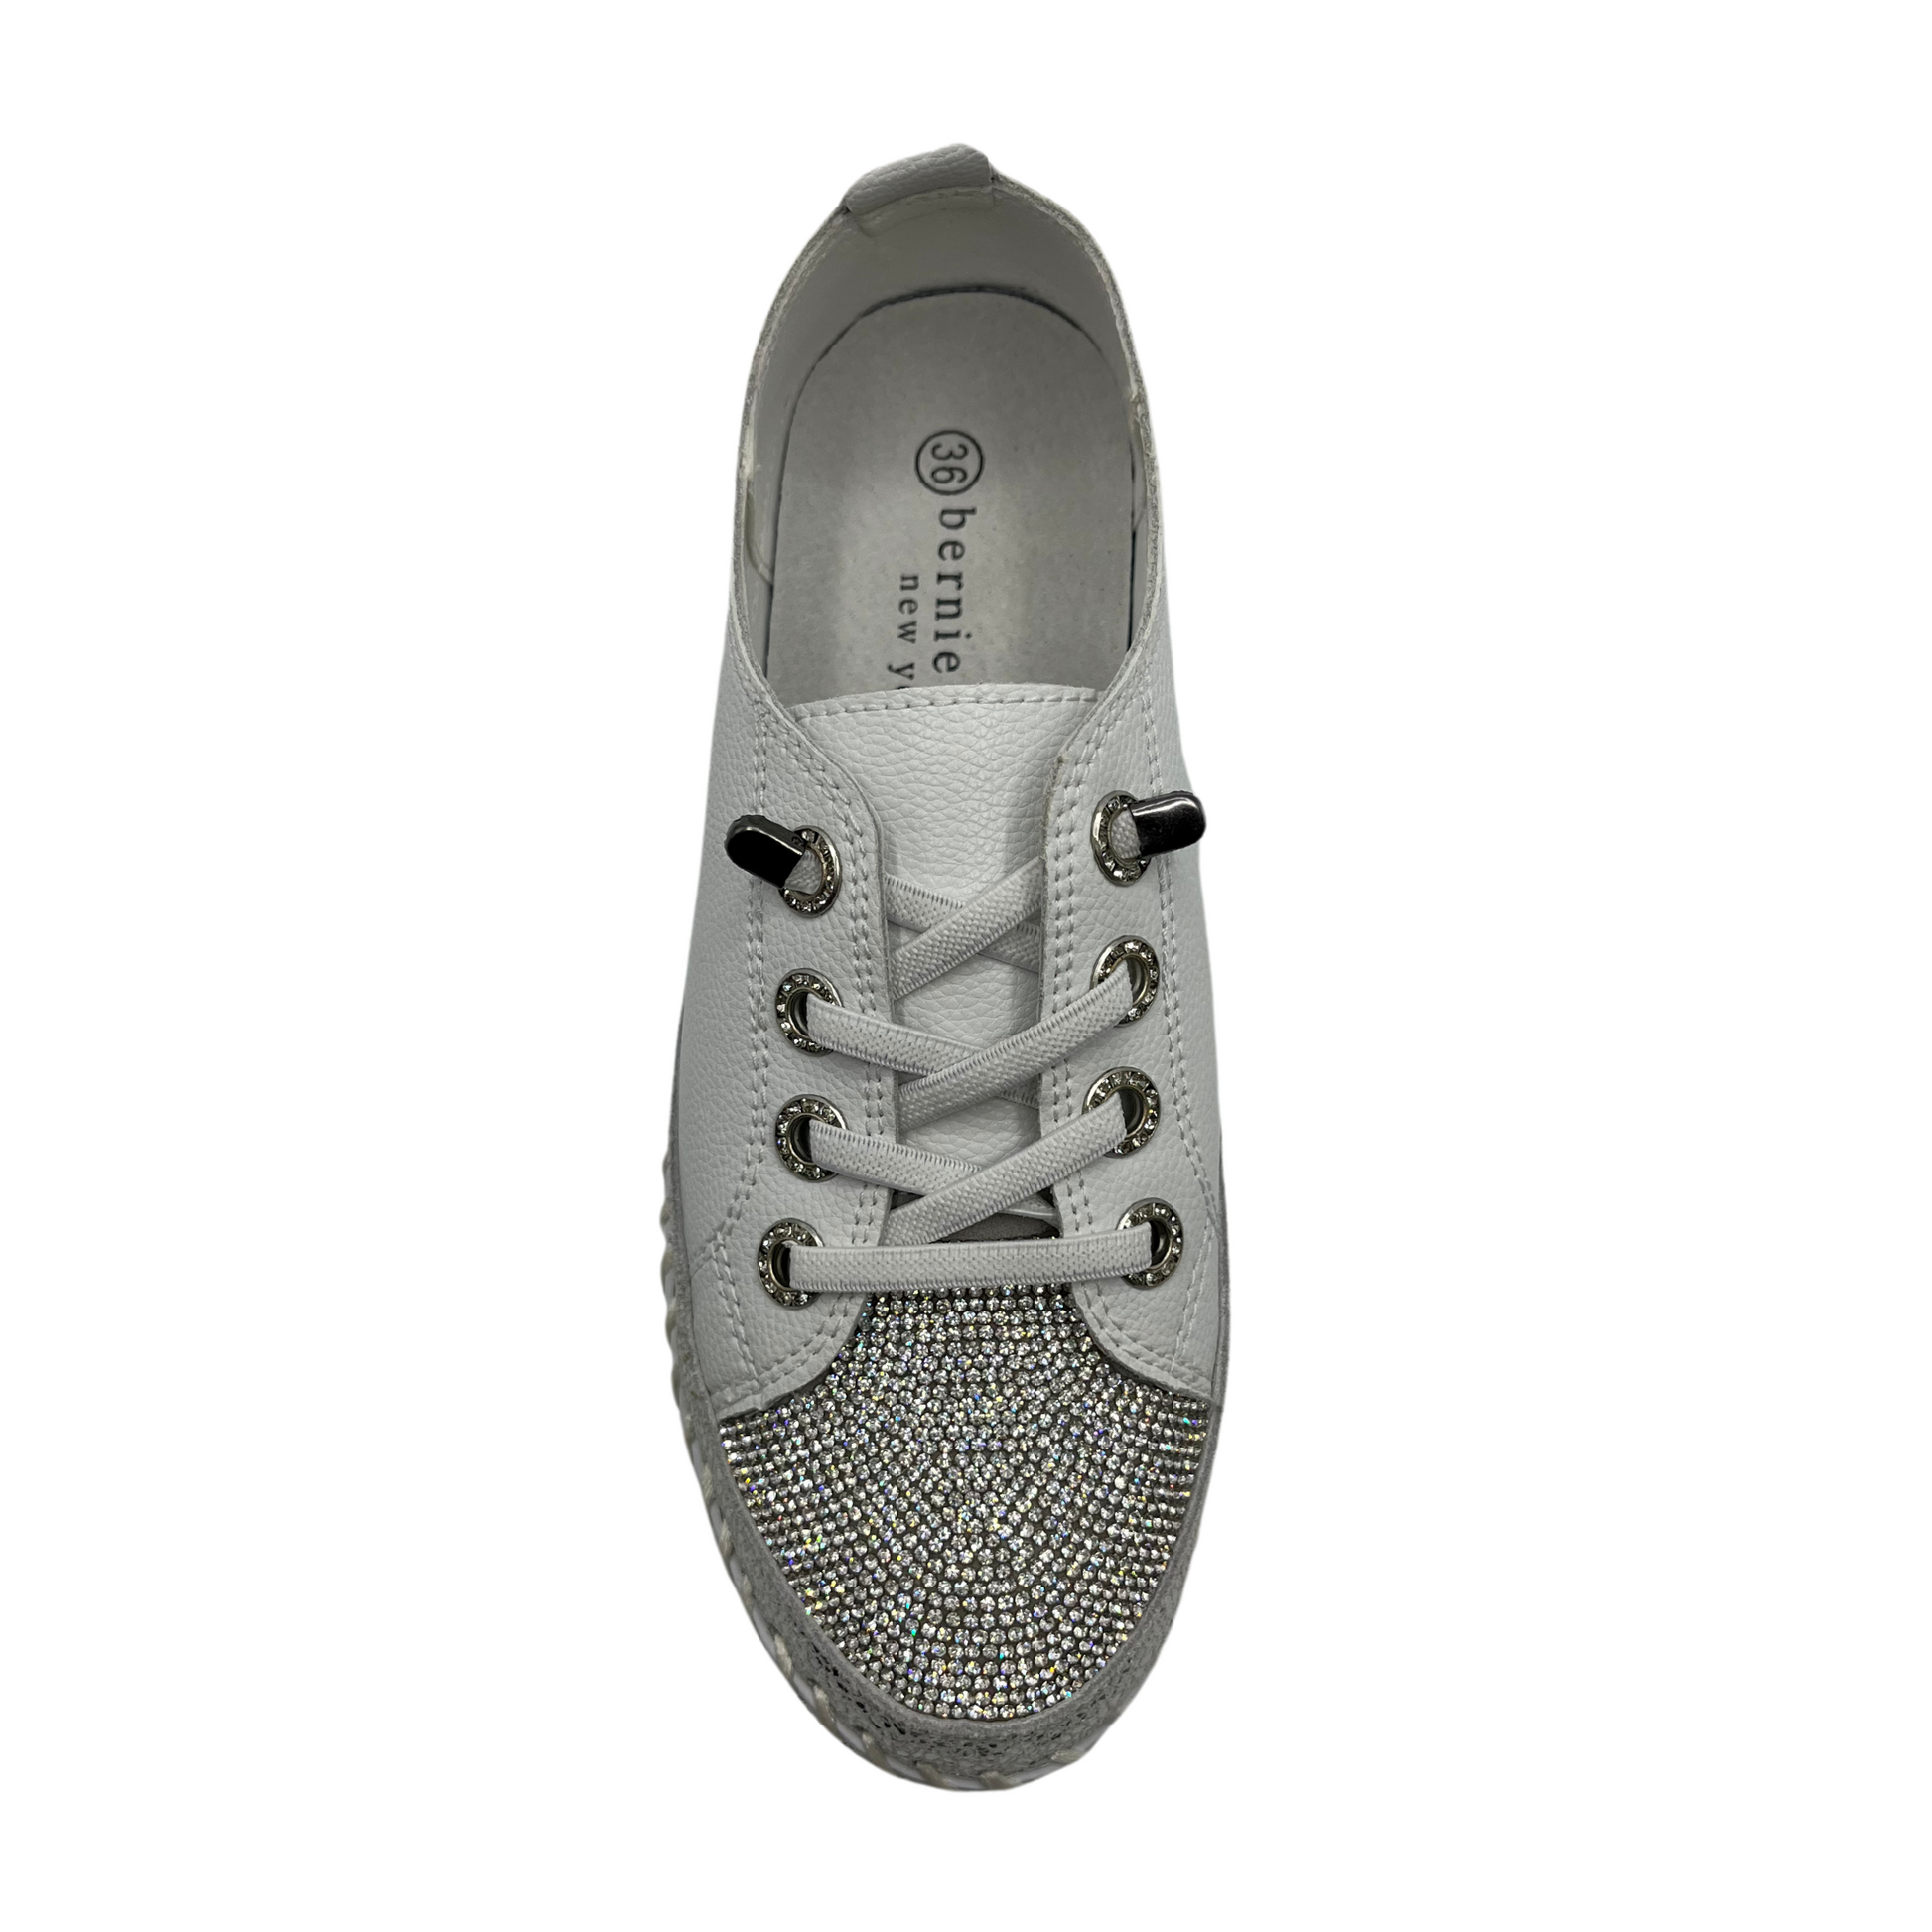 Top view of white platform sneaker with bejewelled accents on upper, toe and around the platform sole